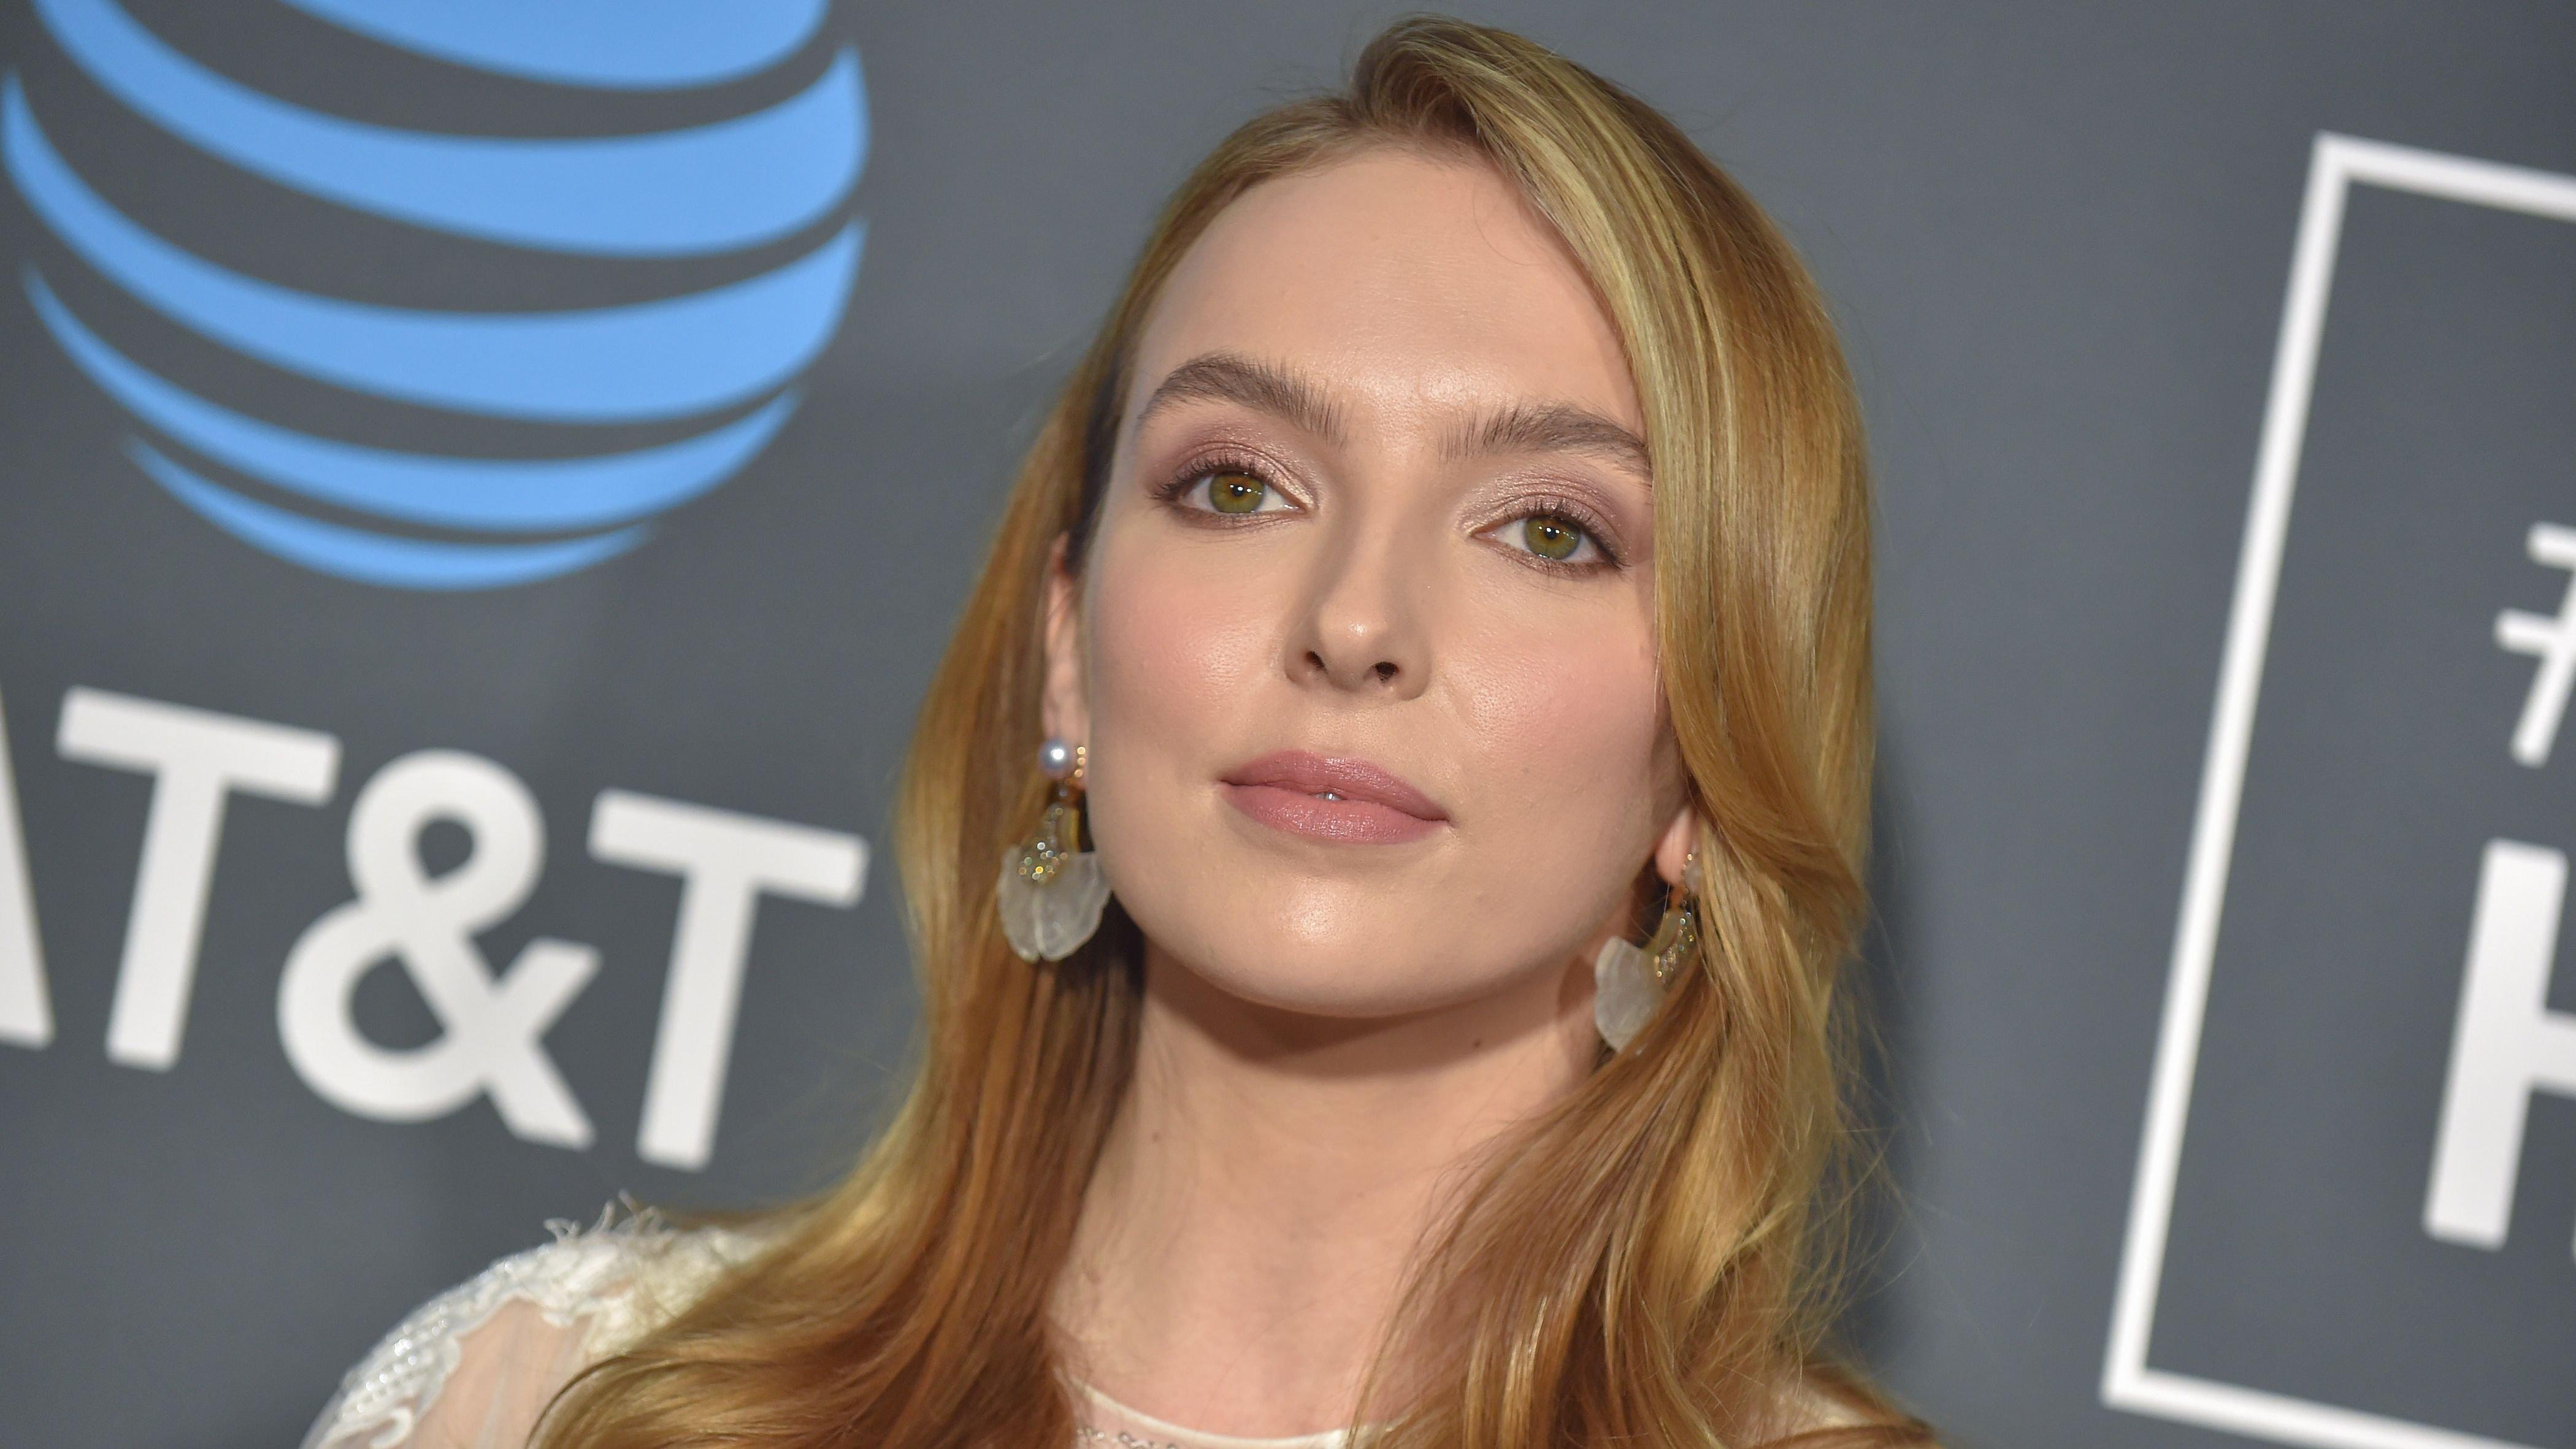 Jodie Comer attends an event sponsored by AT&T. She is wearing a white lace dress and large earrings. 